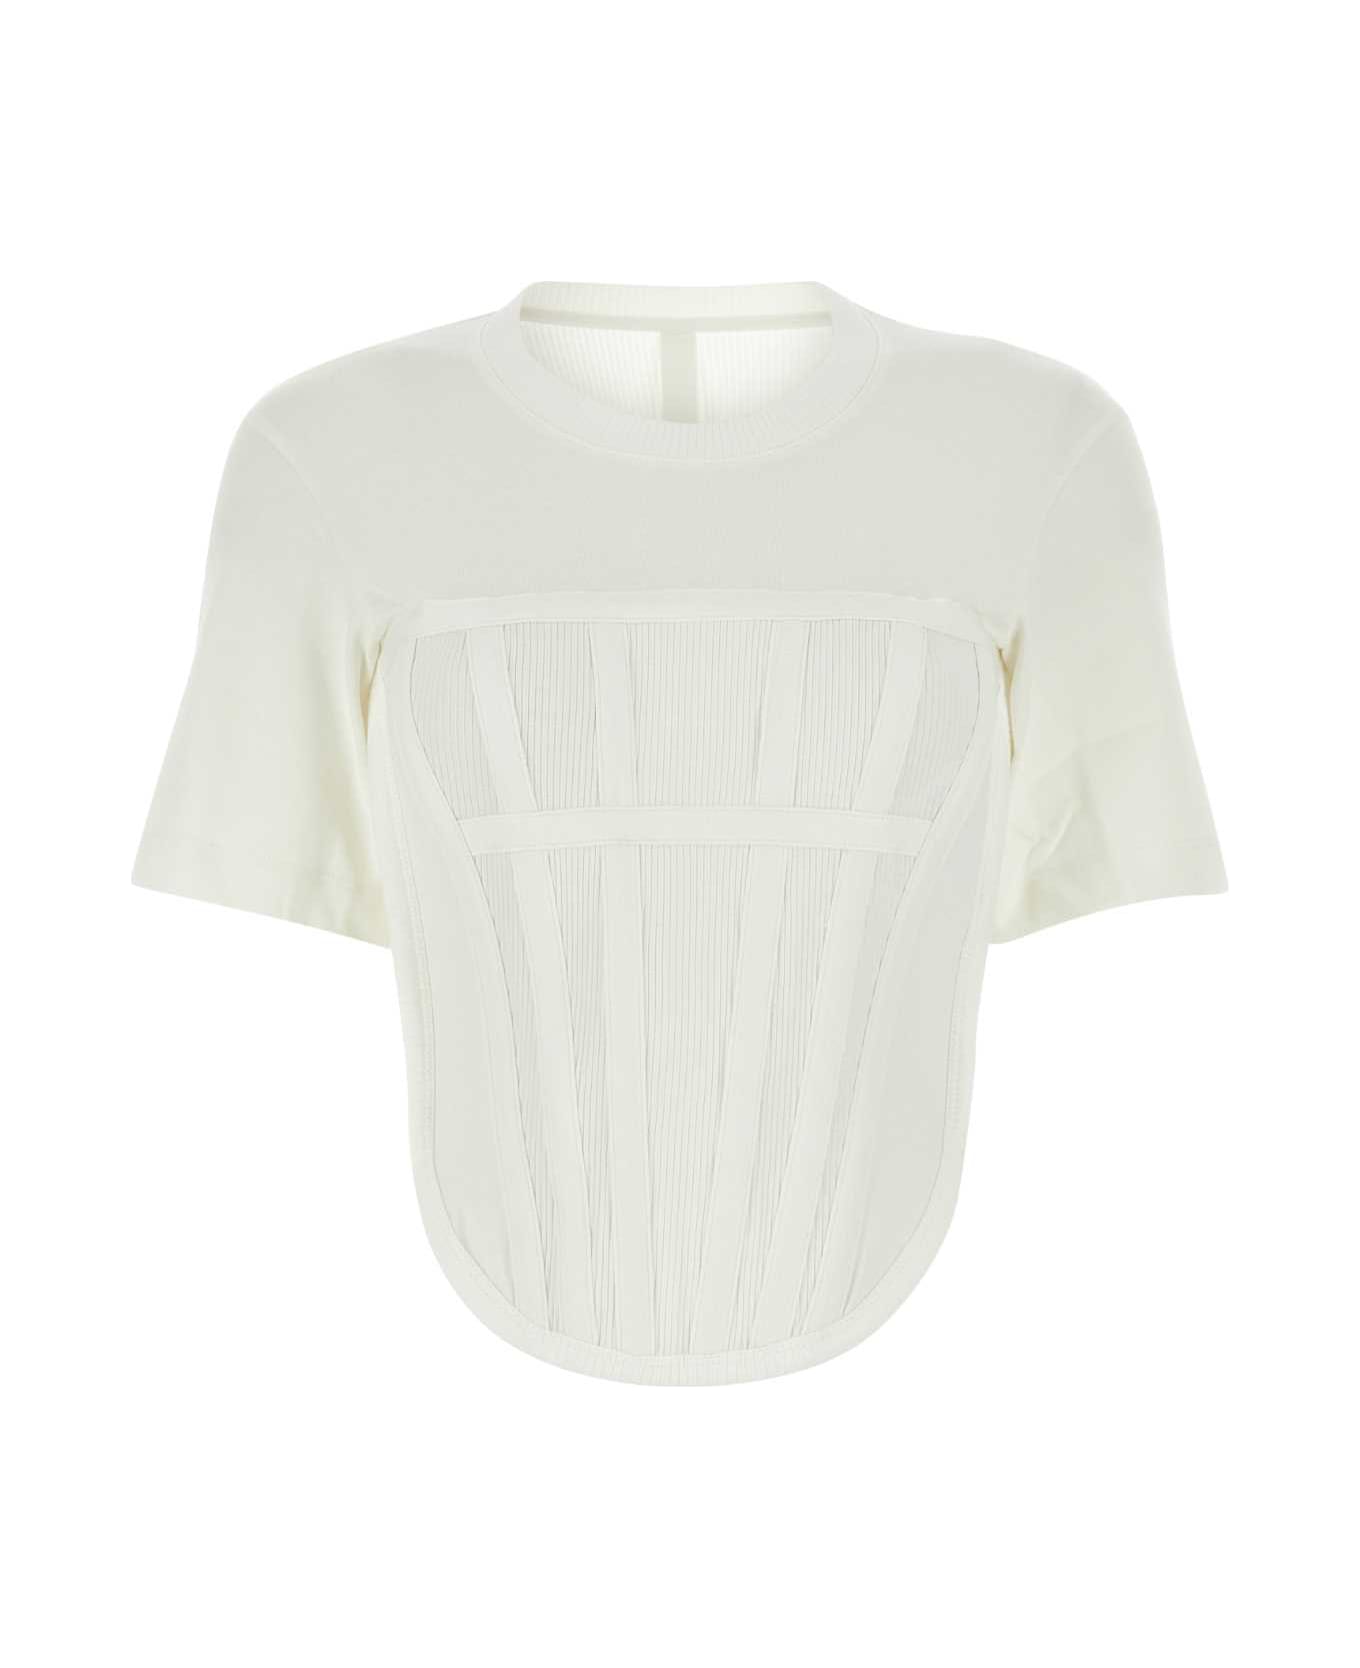 Dion Lee White Cotton T-shirt - IVORY Tシャツ